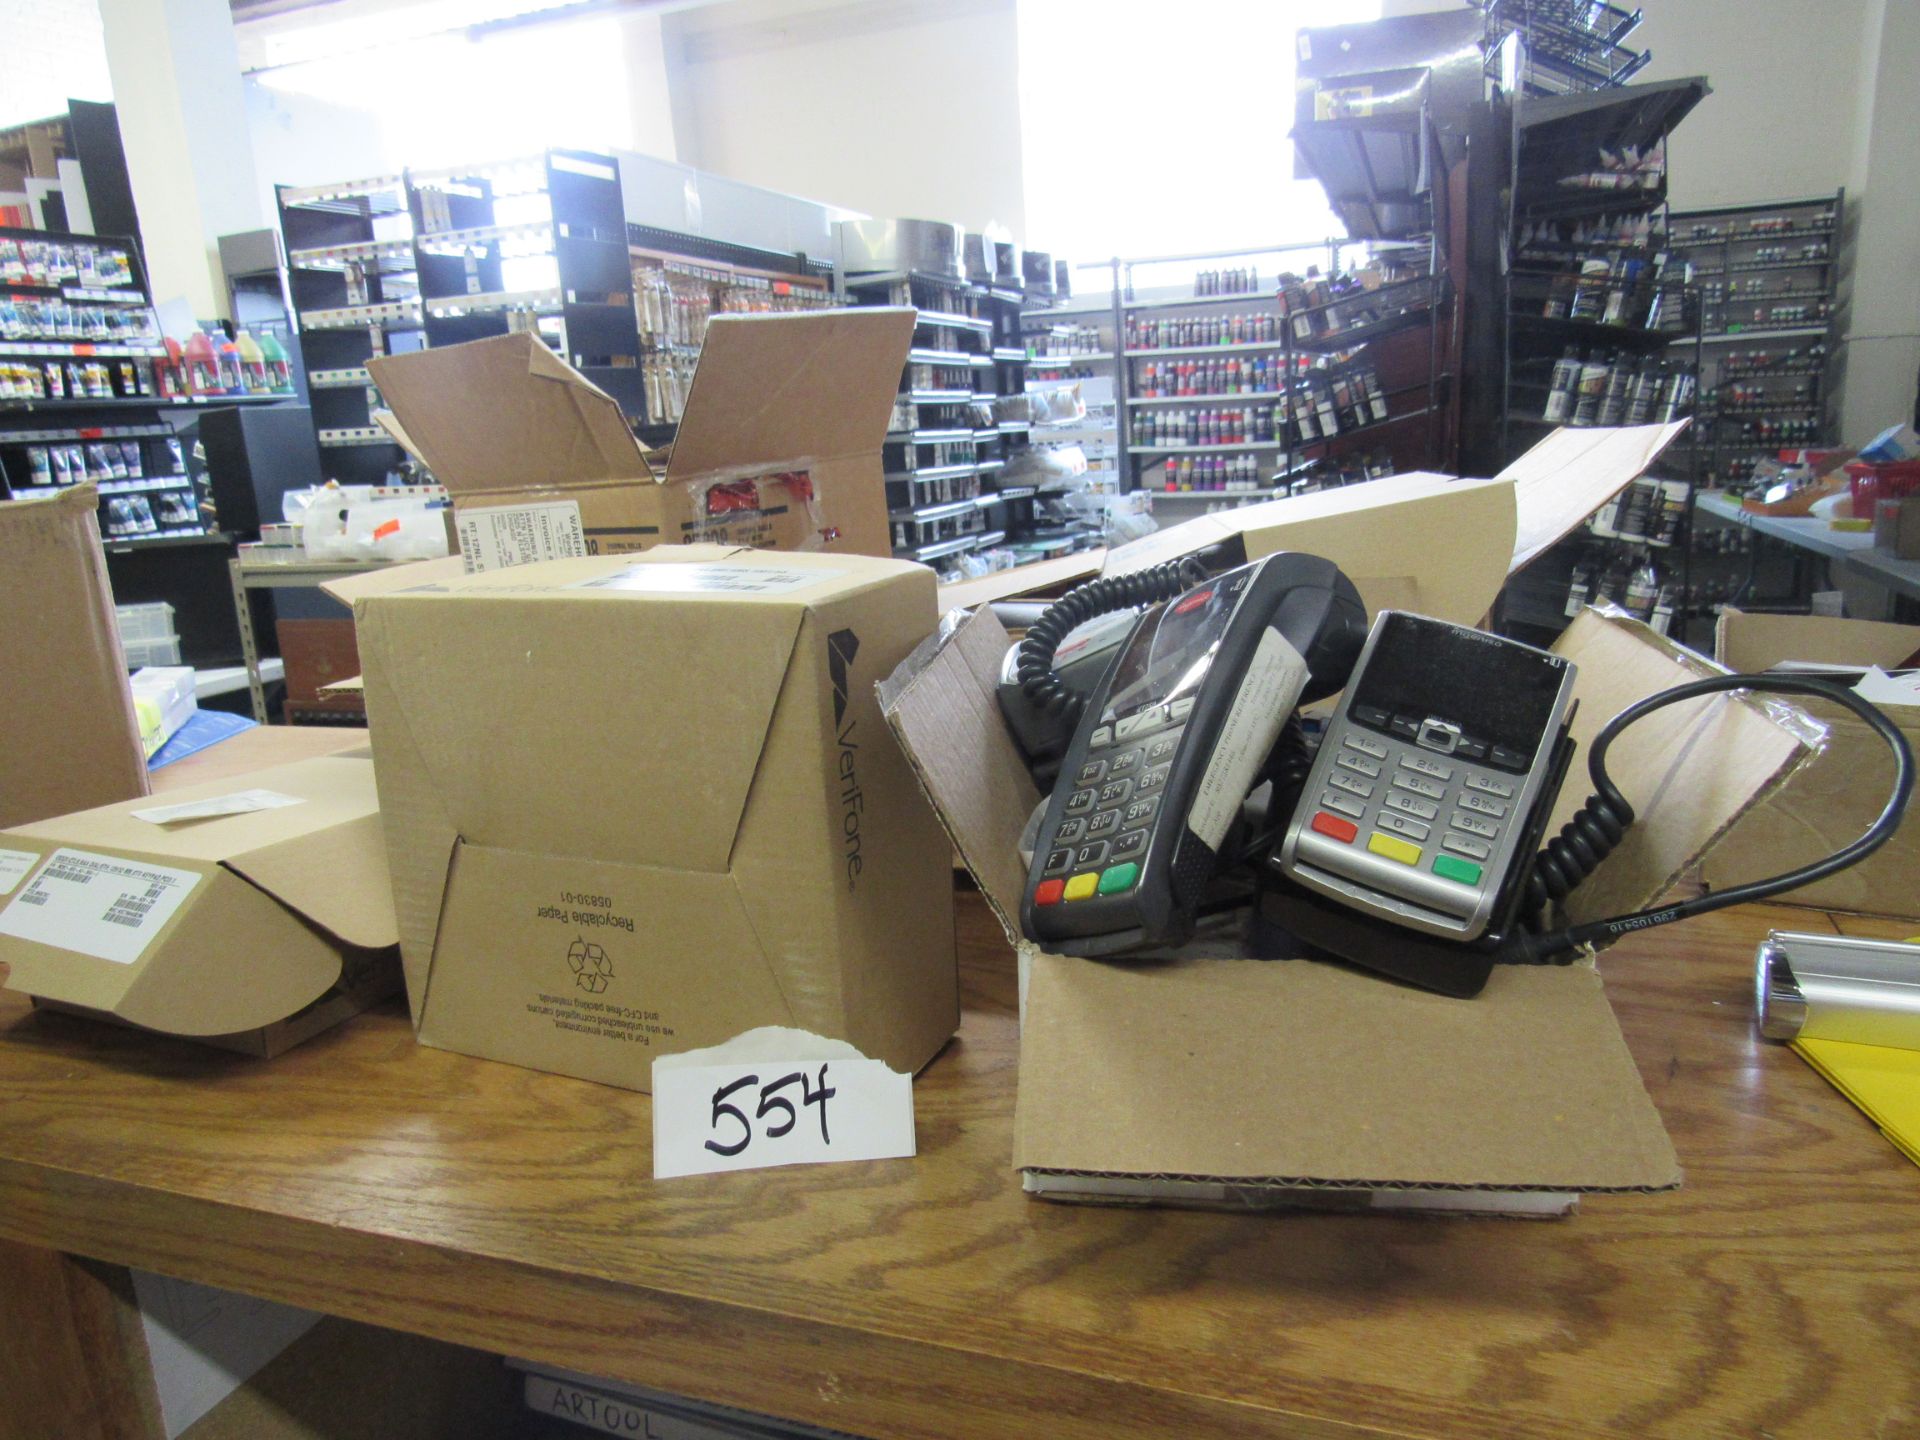 Grp of Credit card systems and tape: VeriFone and Ignecio